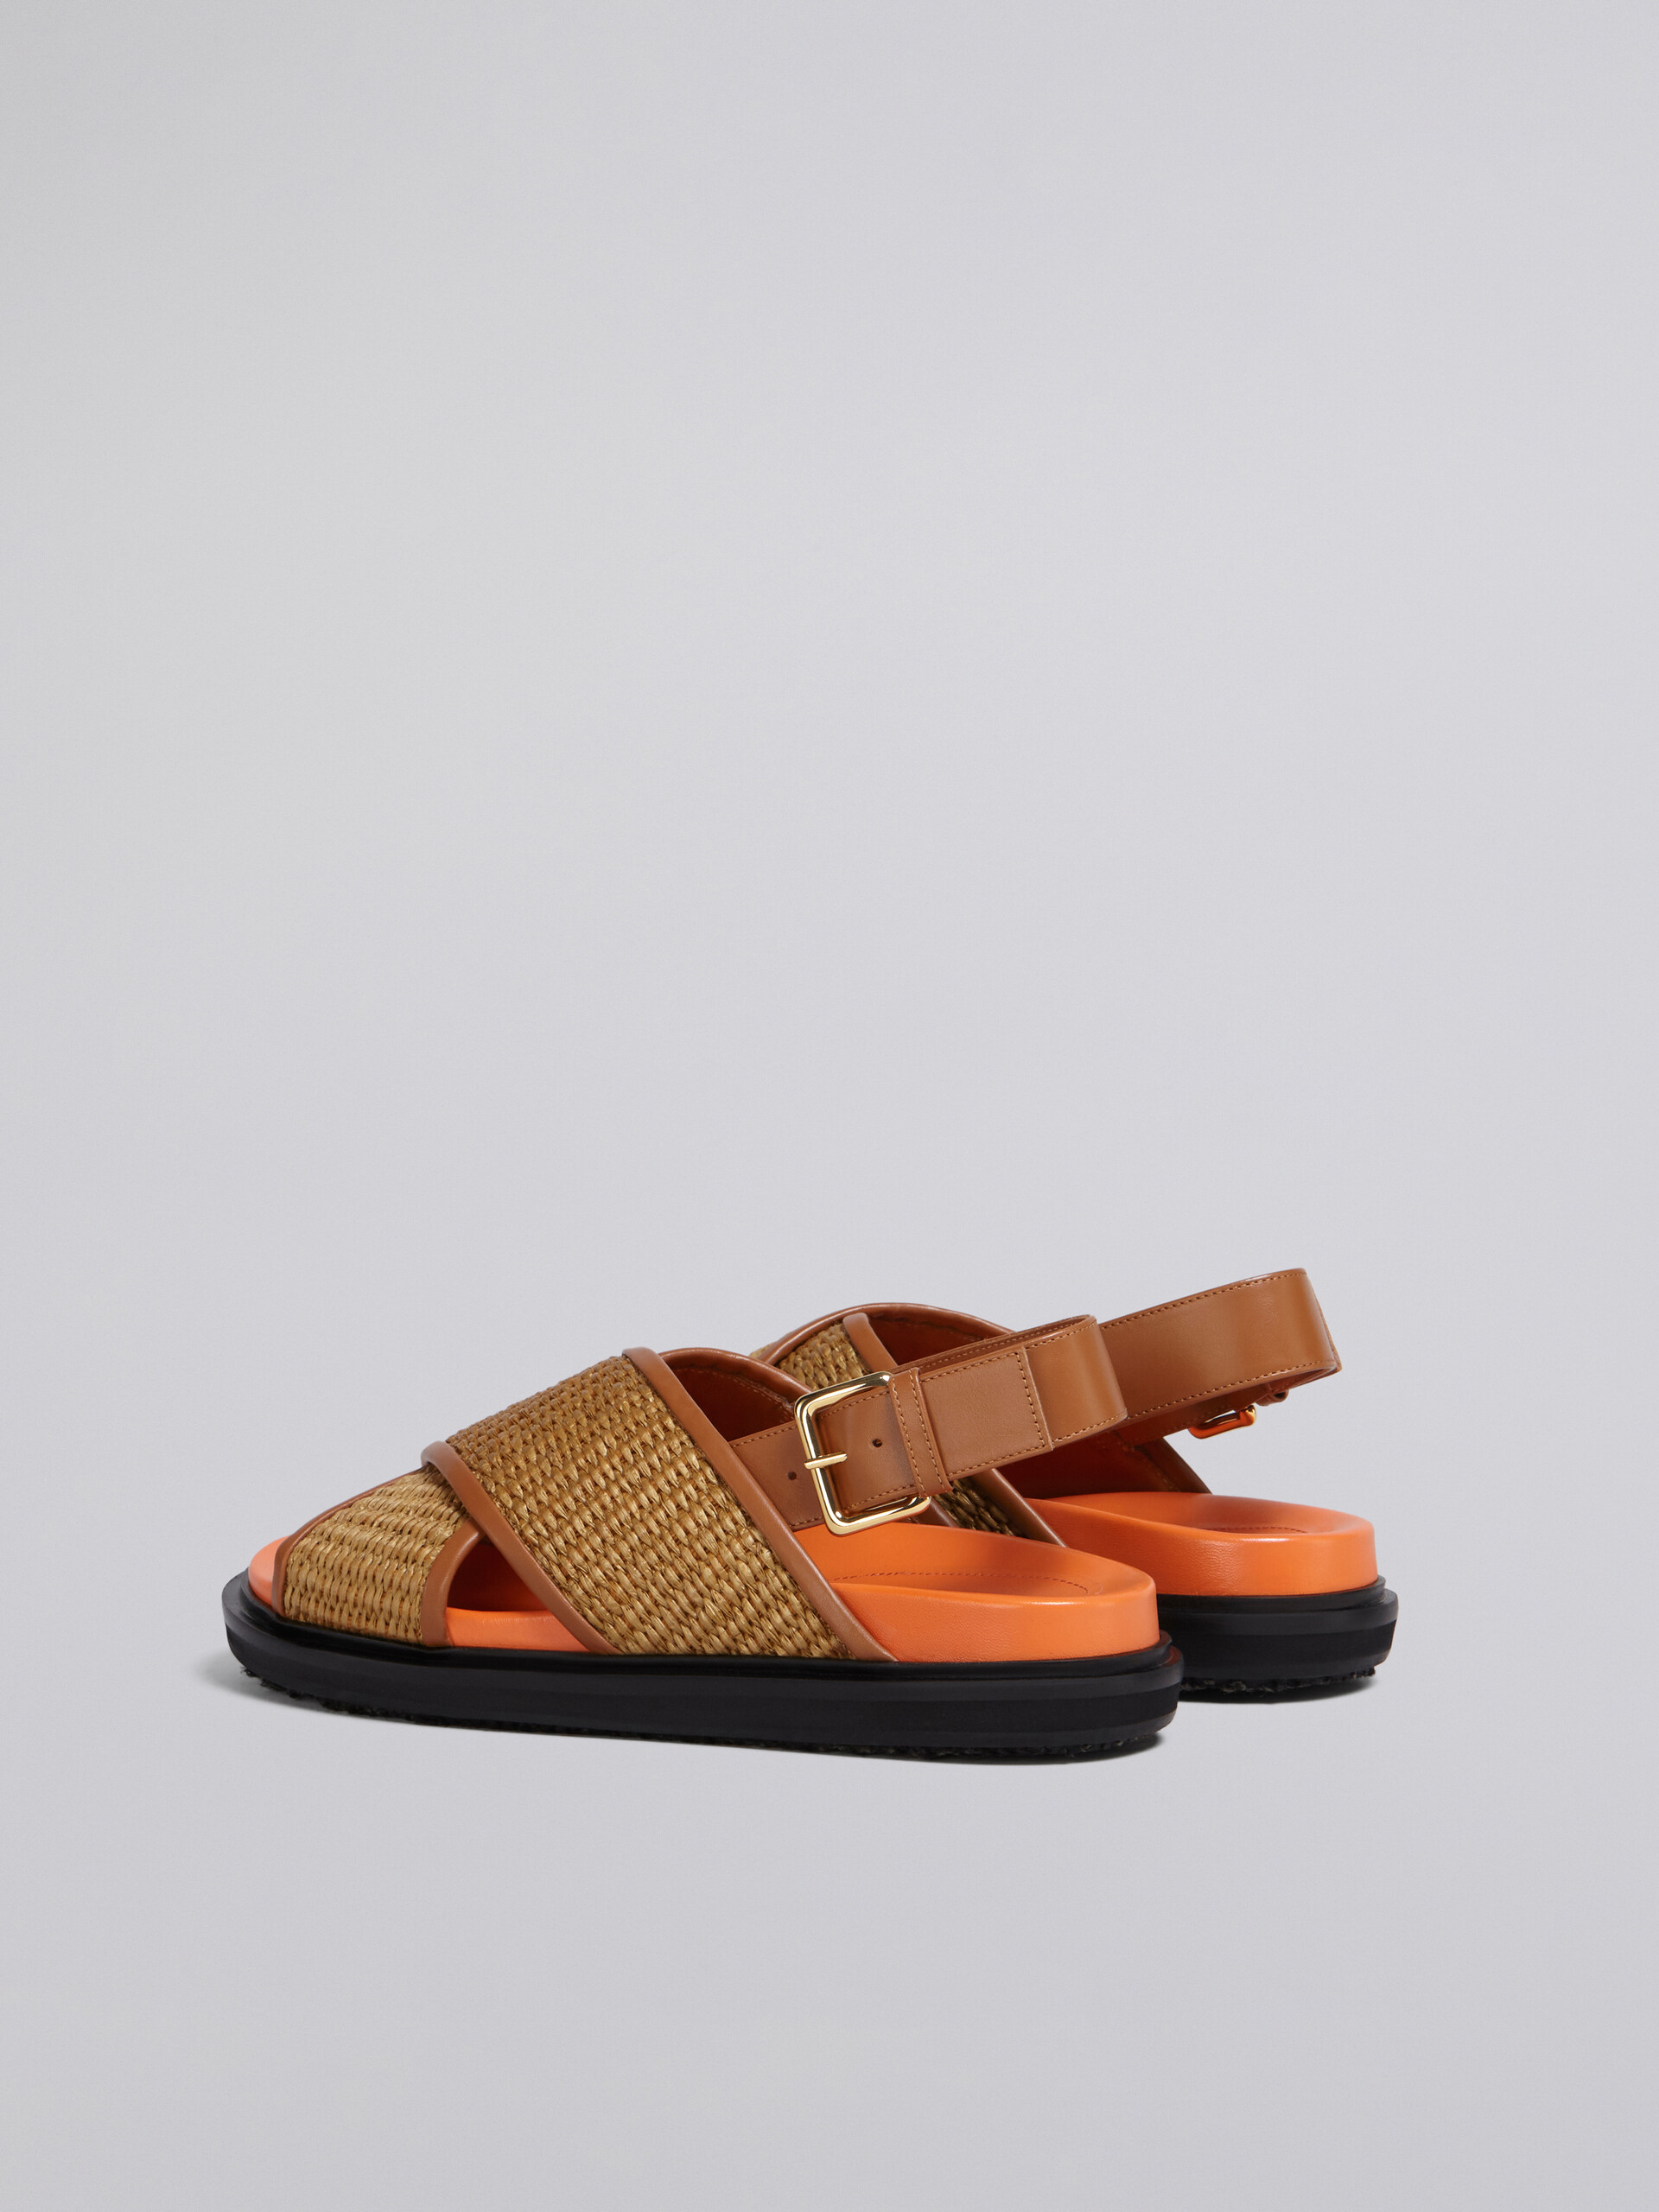 Fussbet sandals in brown leather and raffia-effect fabric - Sandals - Image 3